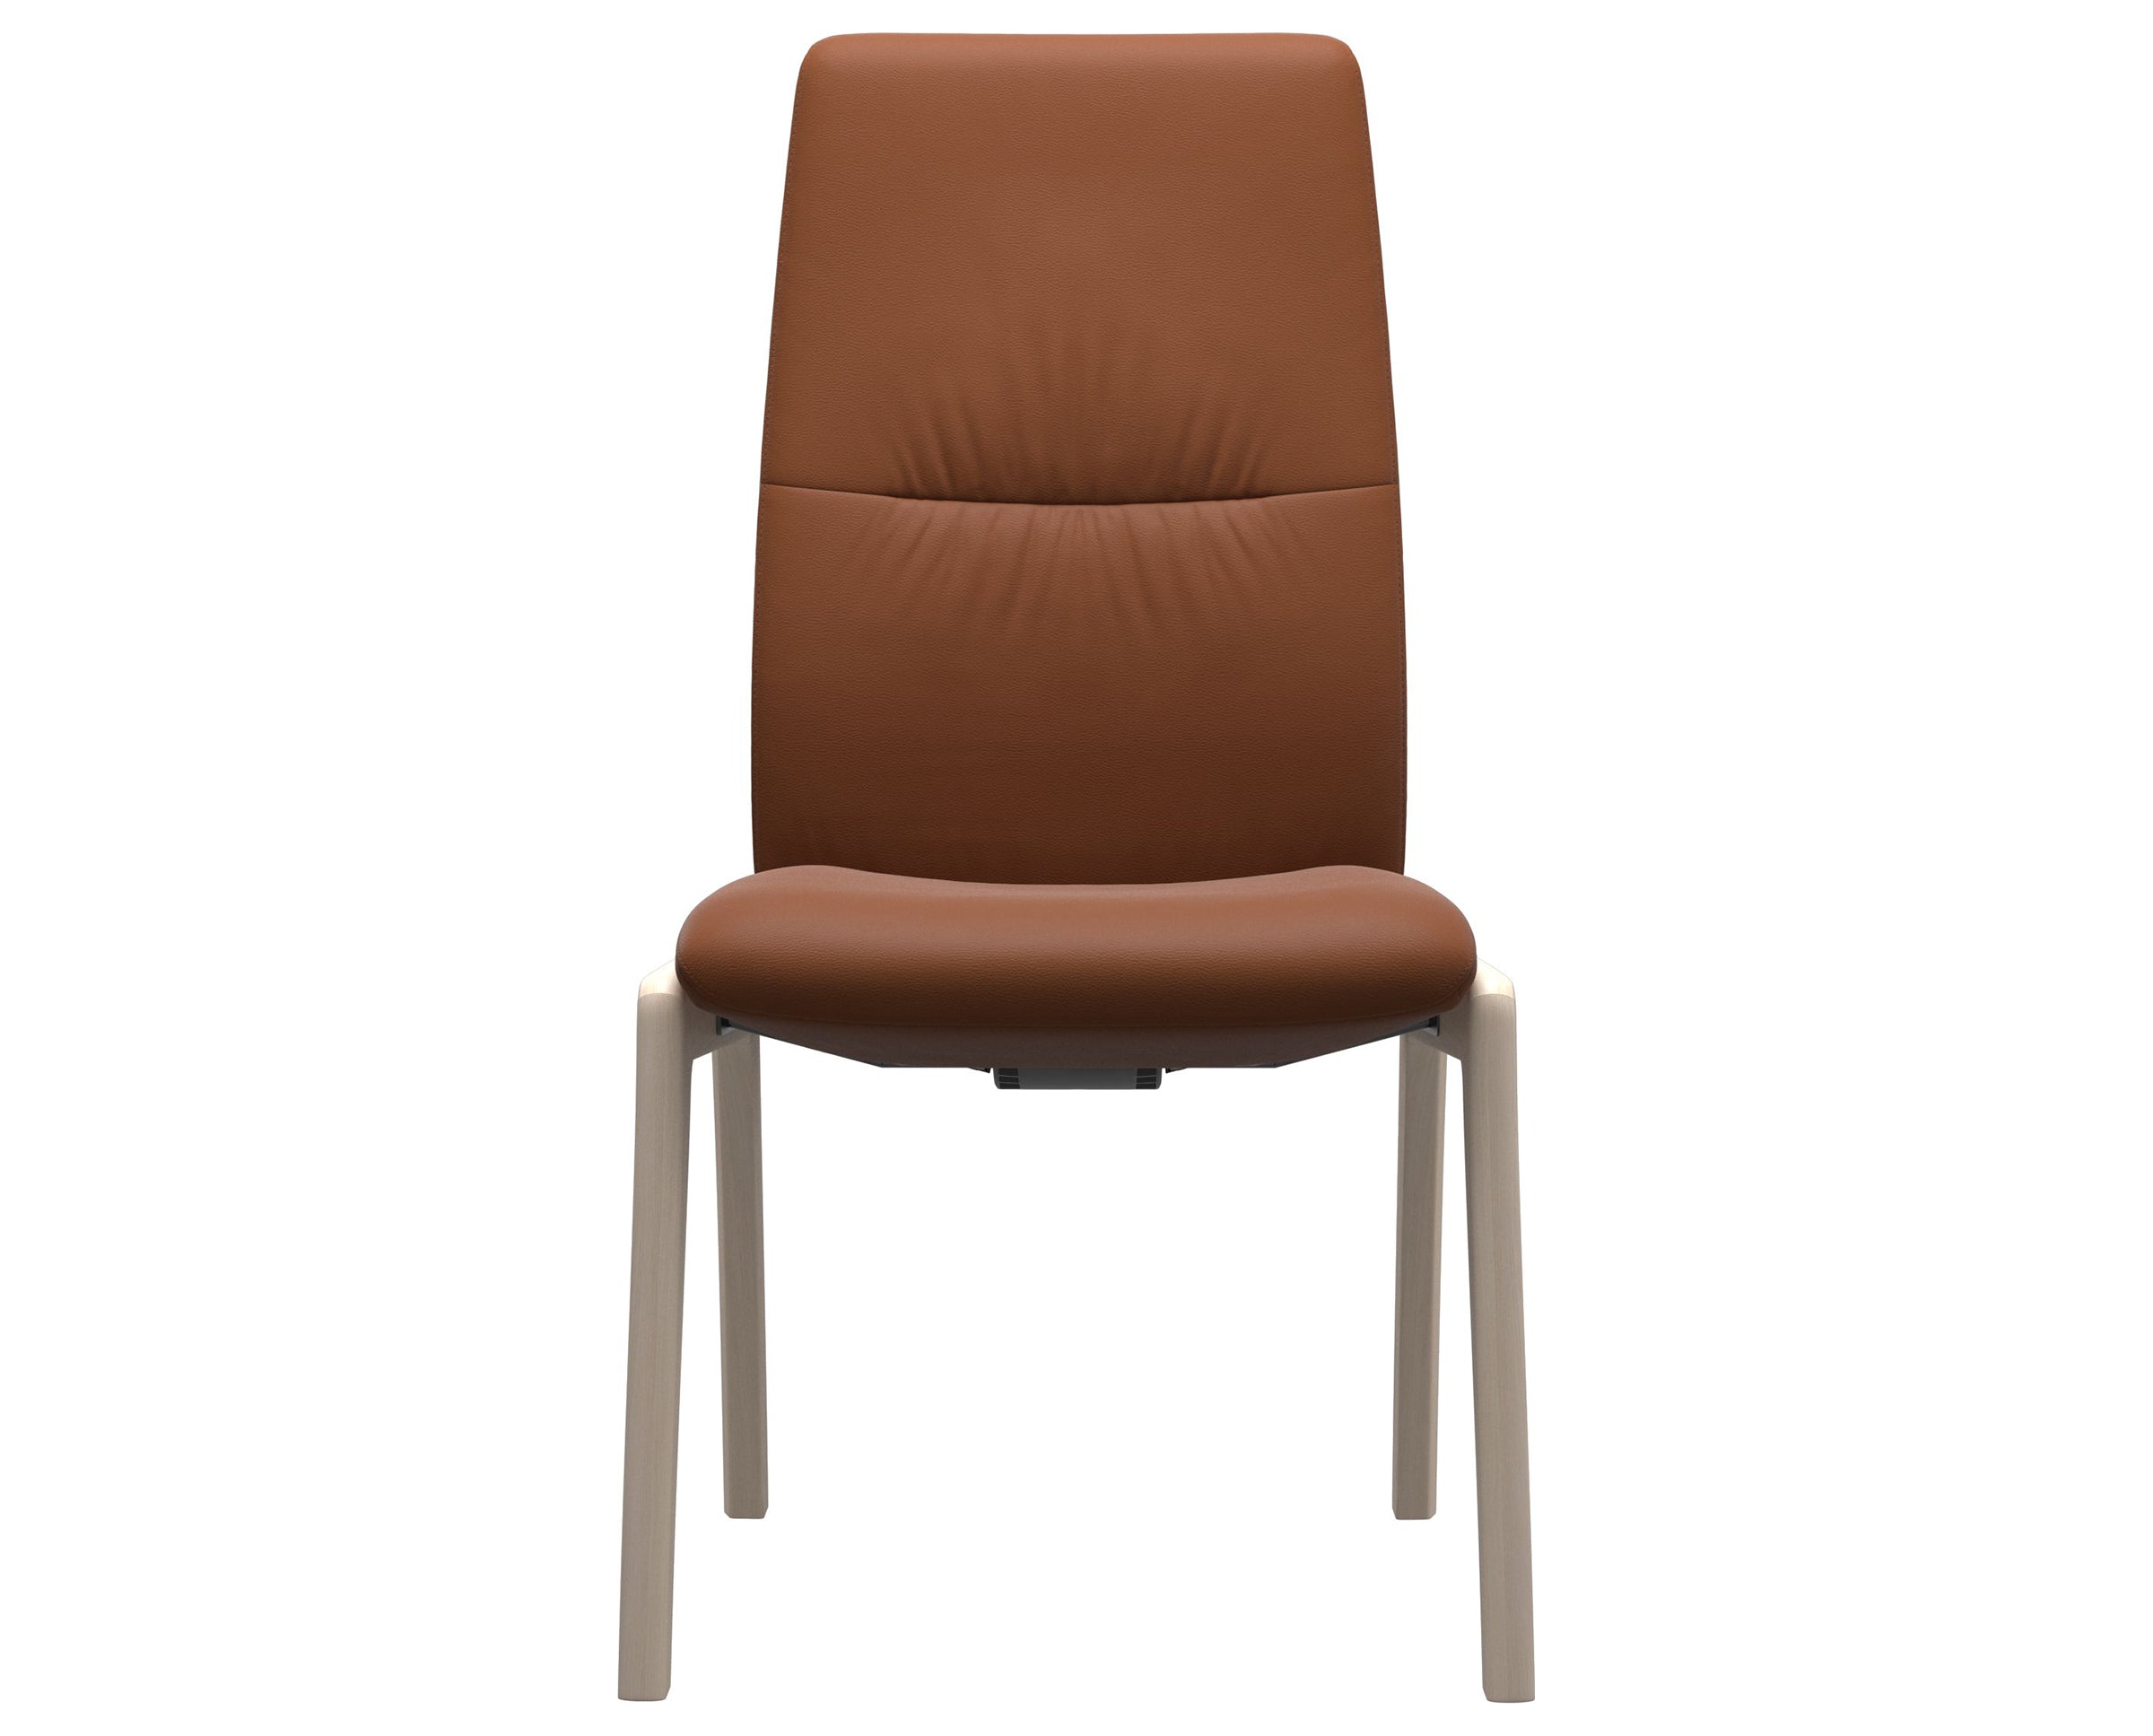 Paloma Leather New Cognac and Whitewash Base | Stressless Mint High Back D100 Dining Chair | Valley Ridge Furniture